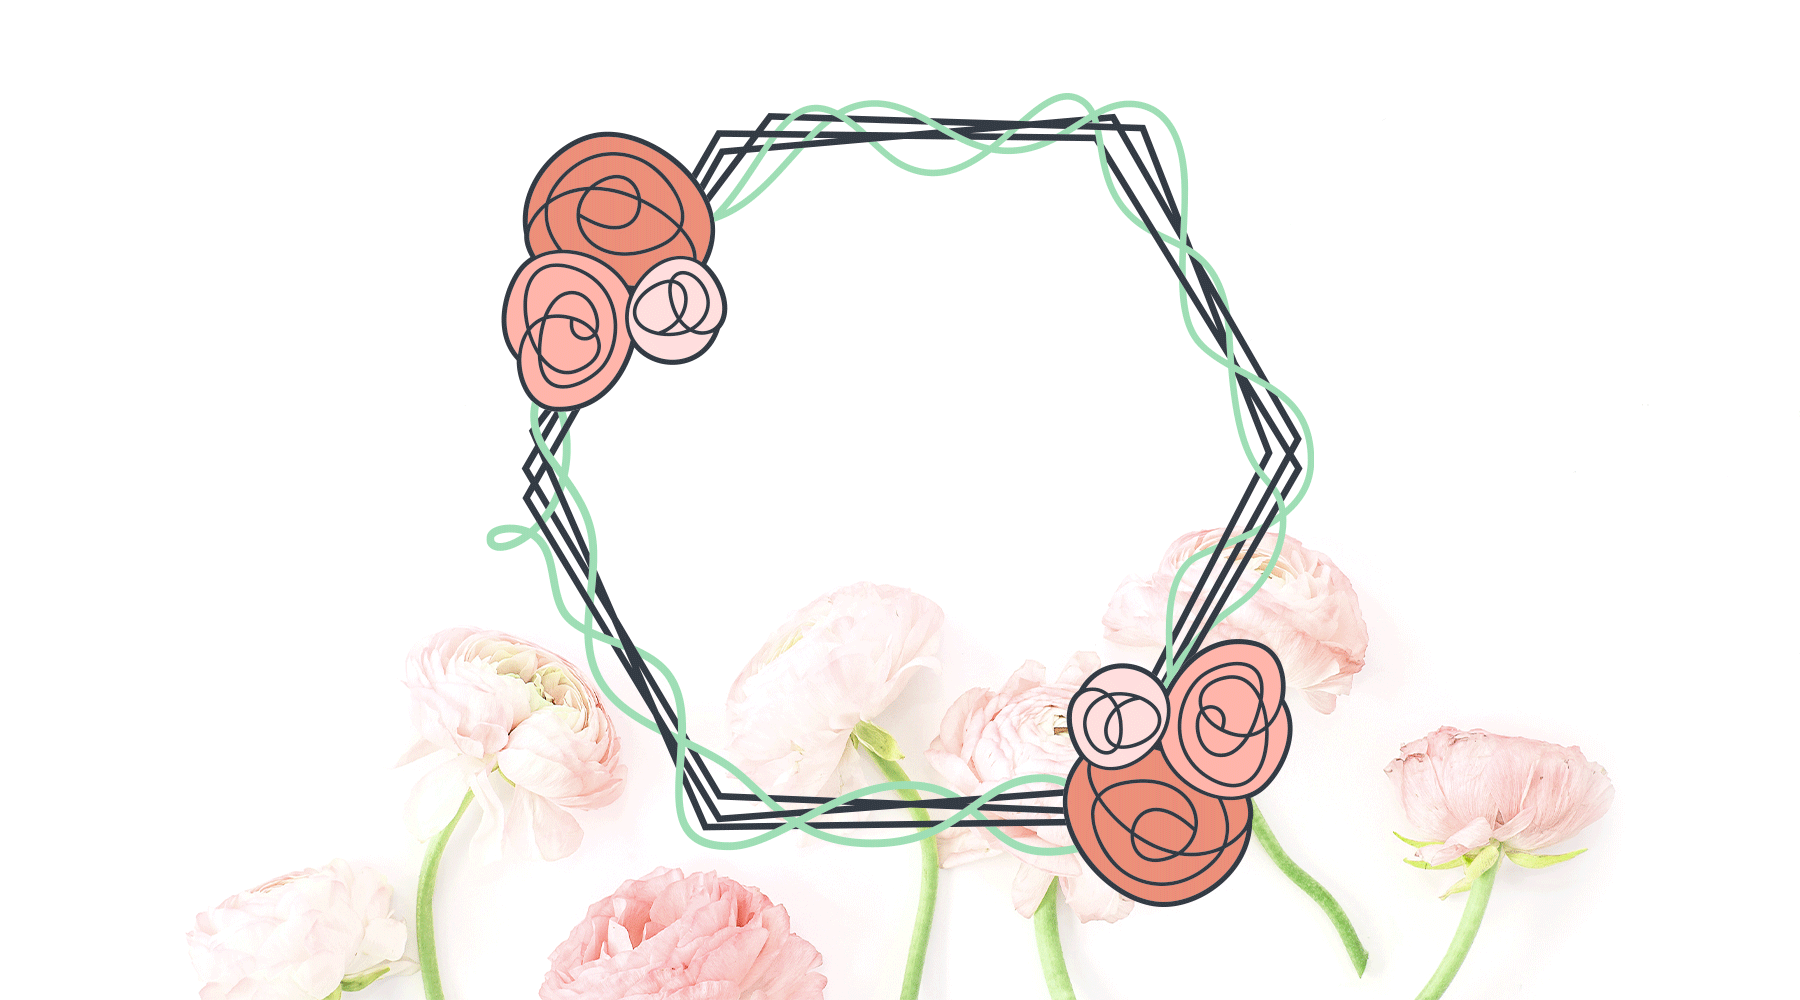 Hexagon Flower Frame SVG DXF EPS PNG Cut Files | Free for Personal Use